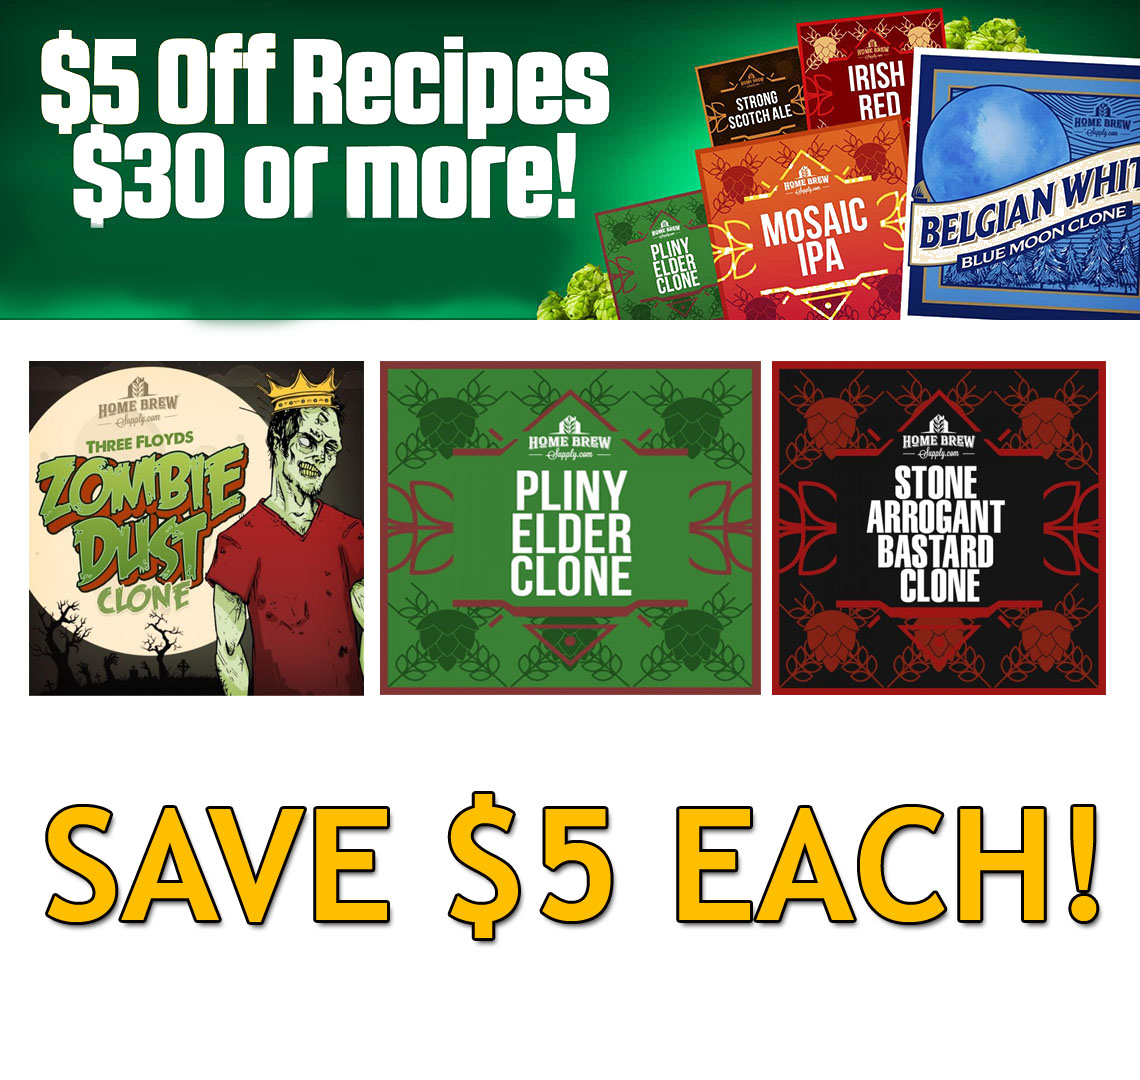  Coupon Code For $5 Off Any Home Brewering Beer Recipe Kit That Cost $30 or More Coupon Code